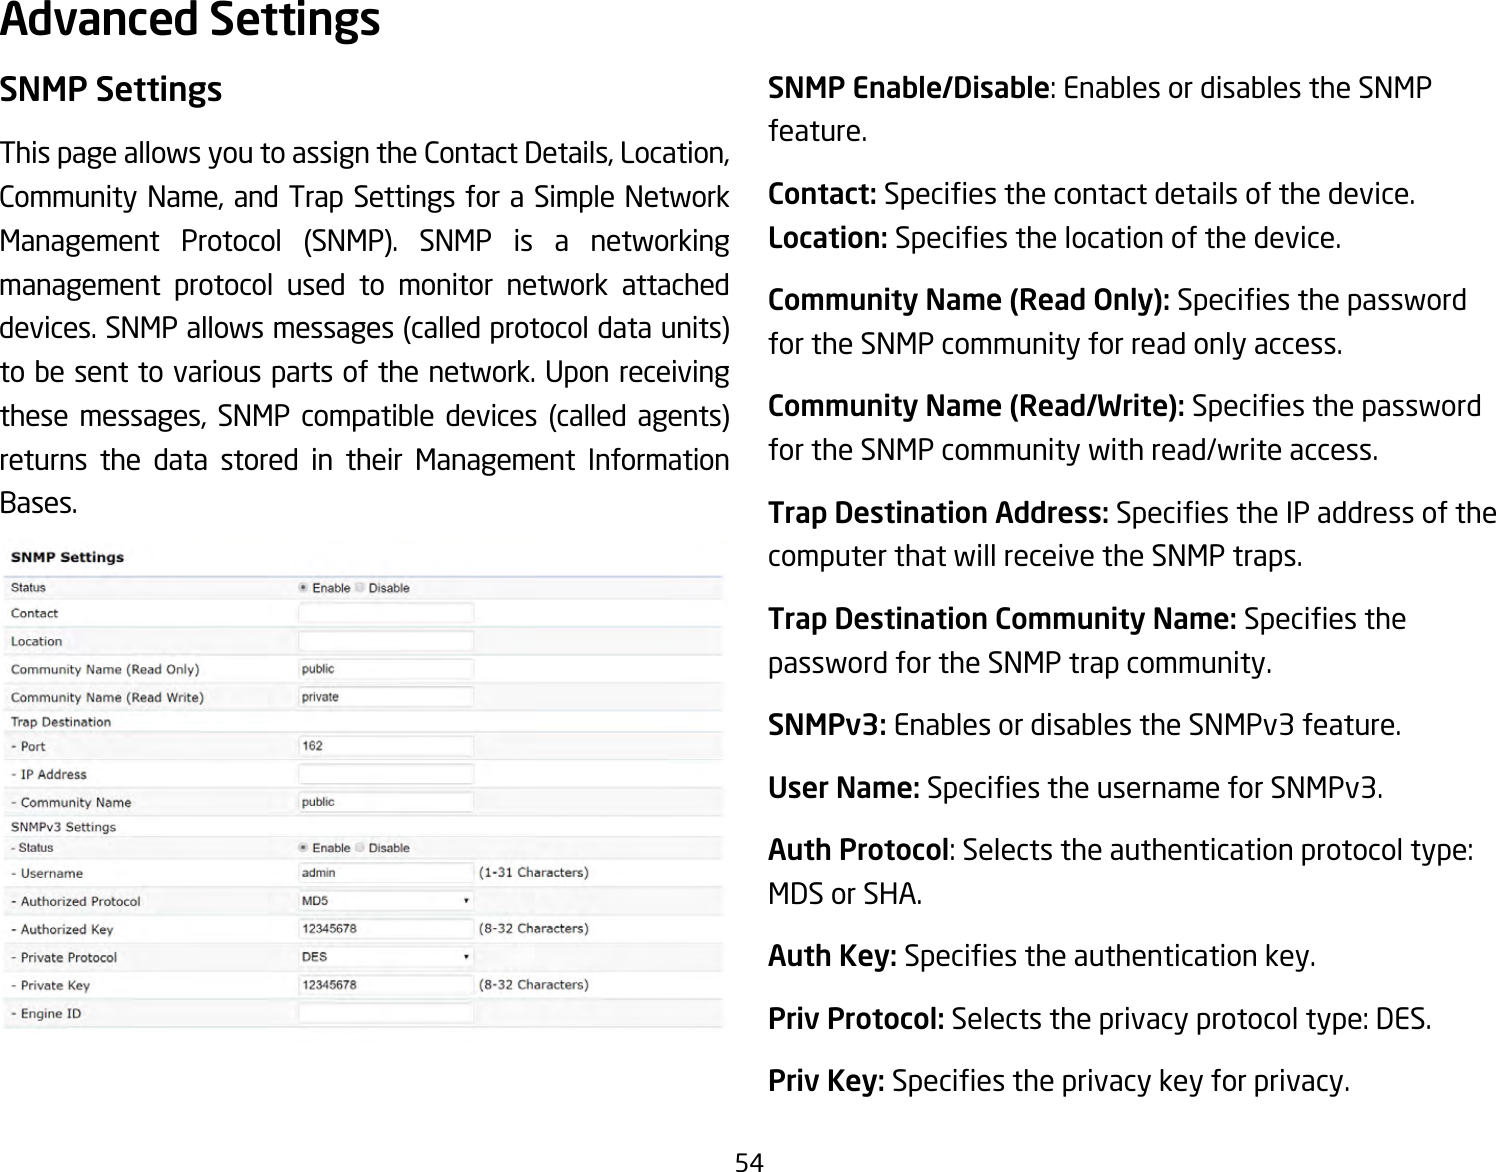 54SNMP SettingsThispageallowsyoutoassigntheContactDetails,Location,CommunityName, and Trap Settings for a Simple NetworkManagement Protocol (SNMP). SNMP is a networkingmanagement protocol used to monitor network attached devices.SNMPallowsmessages(calledprotocoldataunits)to be sent to various parts of the network. Upon receiving these messages, SNMP compatible devices (called agents)returns the data stored in their Management Information Bases.SNMP Enable/Disable:EnablesordisablestheSNMPfeature.Contact: Speciesthecontactdetailsofthedevice.Location: Speciesthelocationofthedevice.Community Name (Read Only): Speciesthepasswordfor the SNMP community for read only access.Community Name (Read/Write):Speciesthepasswordfor the SNMP community with read/write access.Trap Destination Address:SpeciestheIPaddressofthecomputer that will receive the SNMP traps.Trap Destination Community Name: Speciesthepassword for the SNMP trap community.SNMPv3: Enables or disables the SNMPv3 feature.User Name:SpeciestheusernameforSNMPv3.Auth Protocol:Selectstheauthenticationprotocoltype:MDS or SHA.Auth Key: Speciestheauthenticationkey.Priv Protocol:Selectstheprivacyprotocoltype:DES.Priv Key: Speciestheprivacykeyforprivacy.Advanced Settings